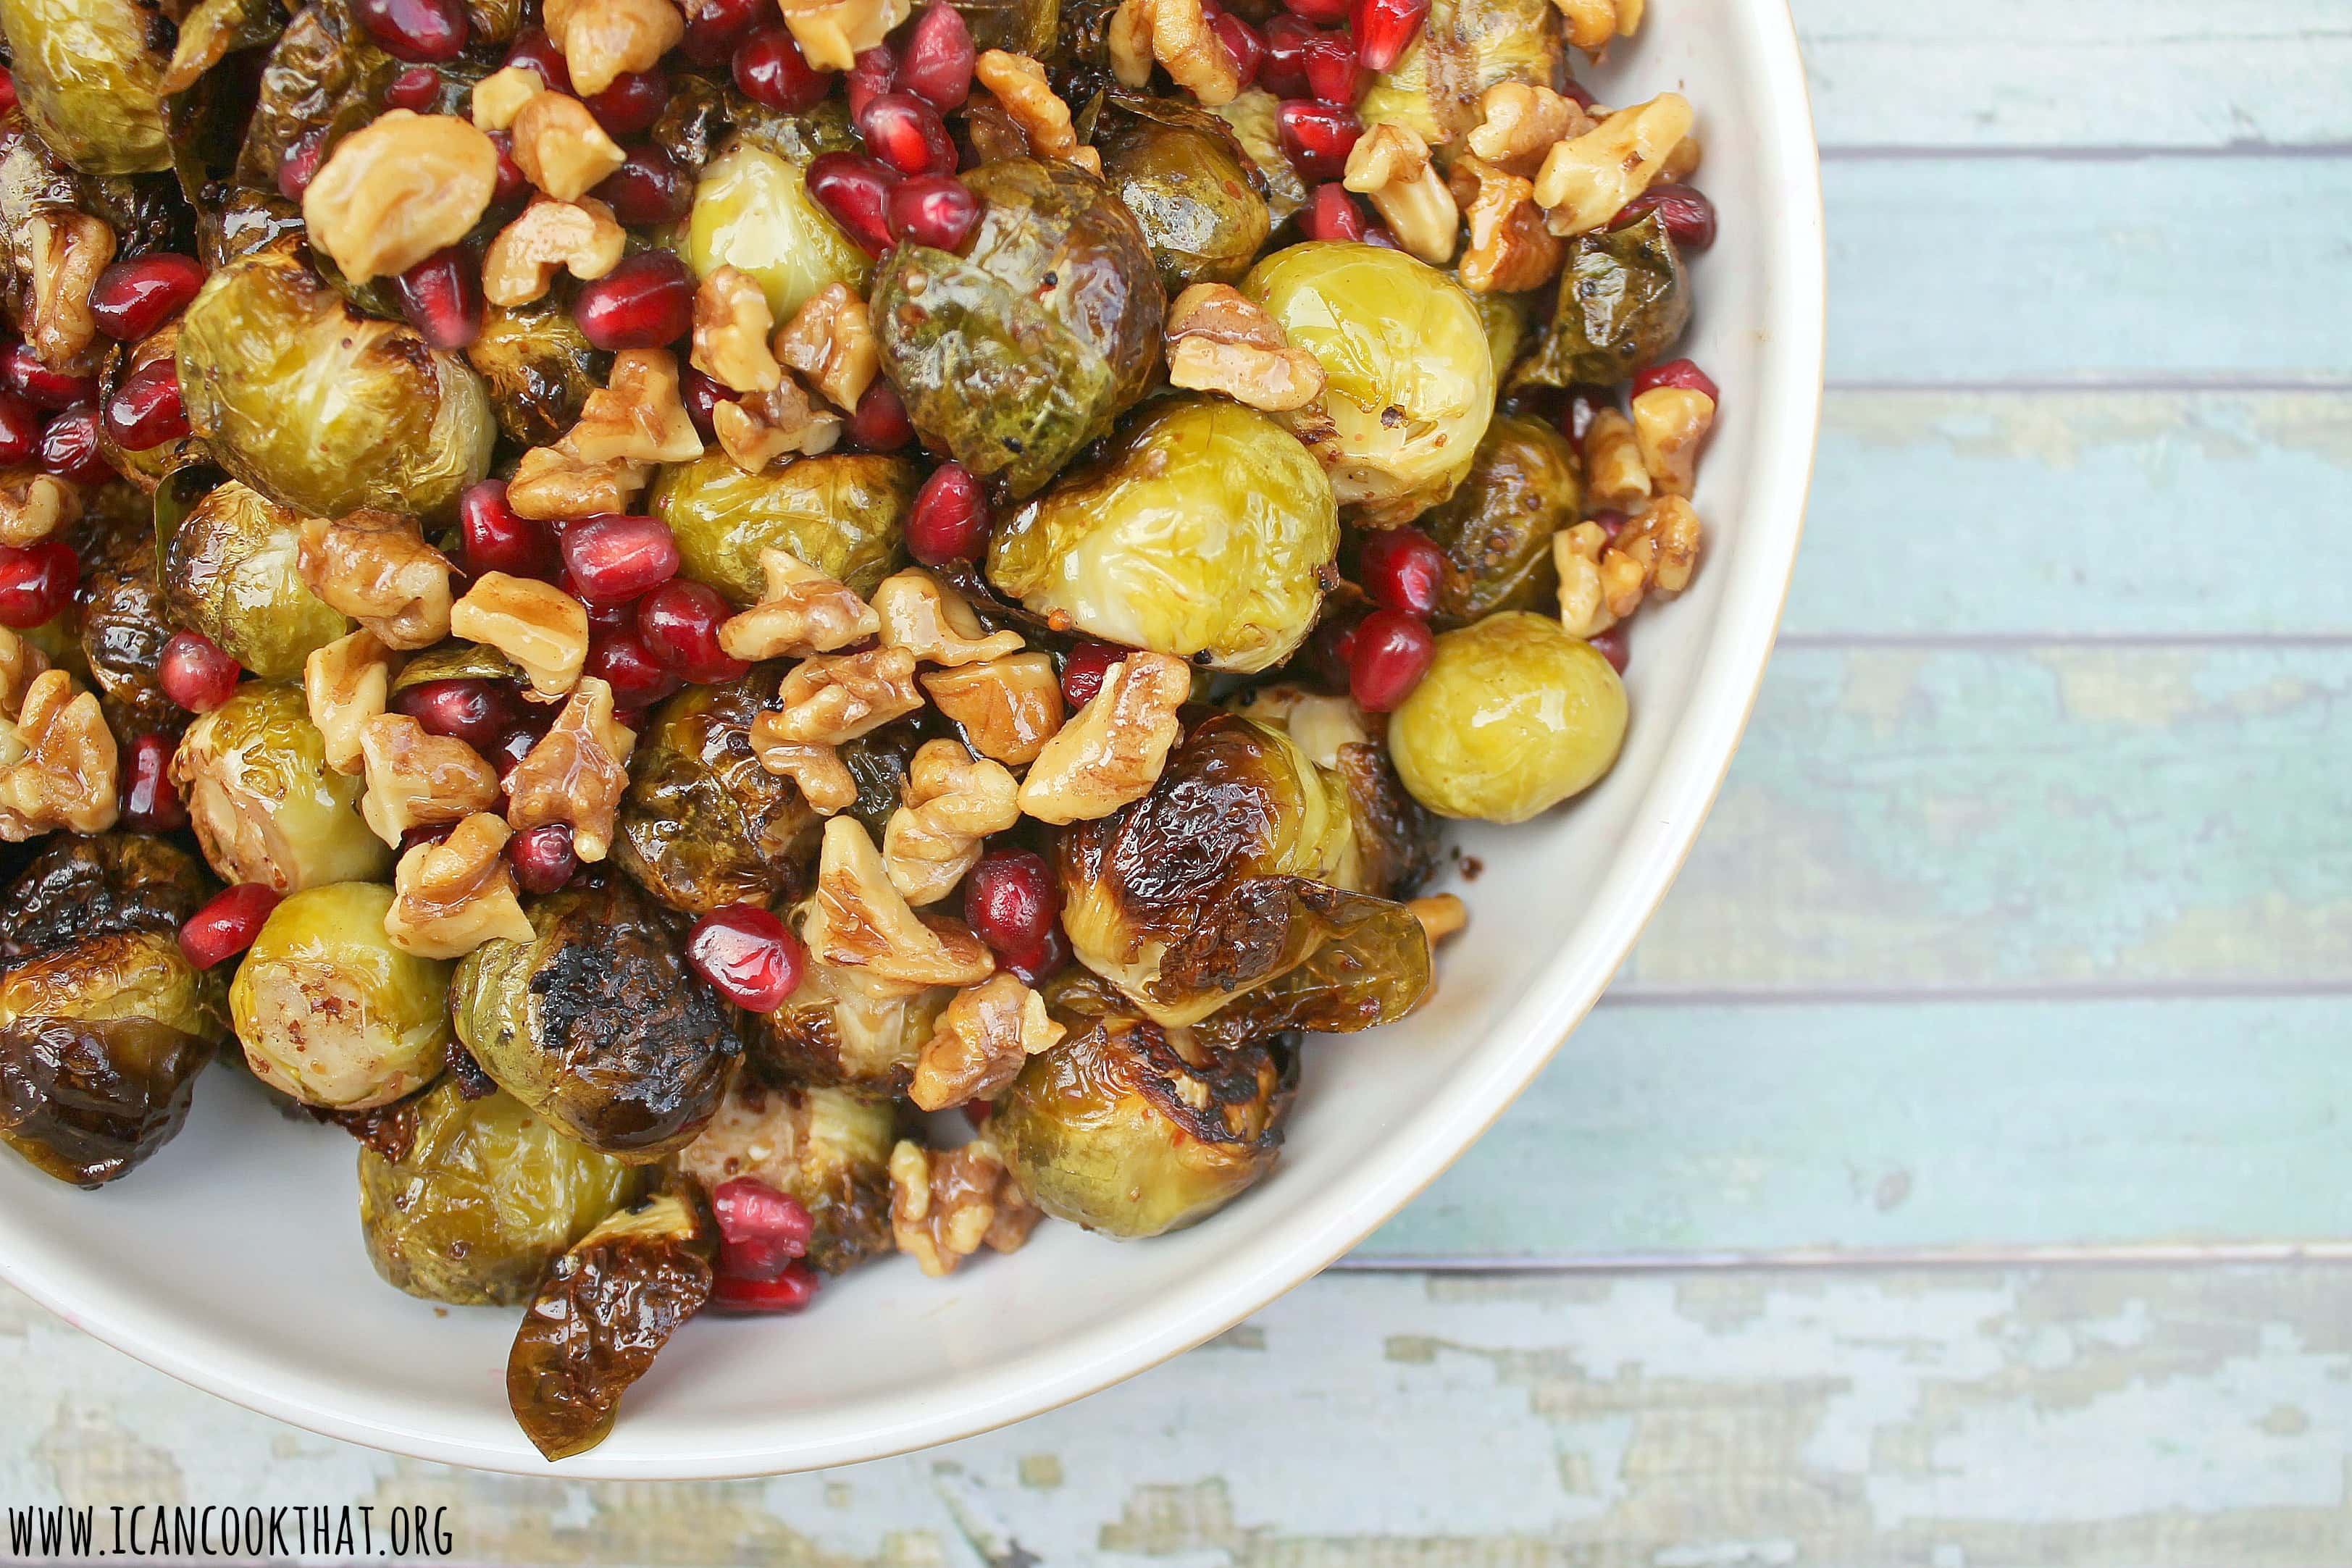 Pomegranate-Mustard Roasted Brussels Sprouts